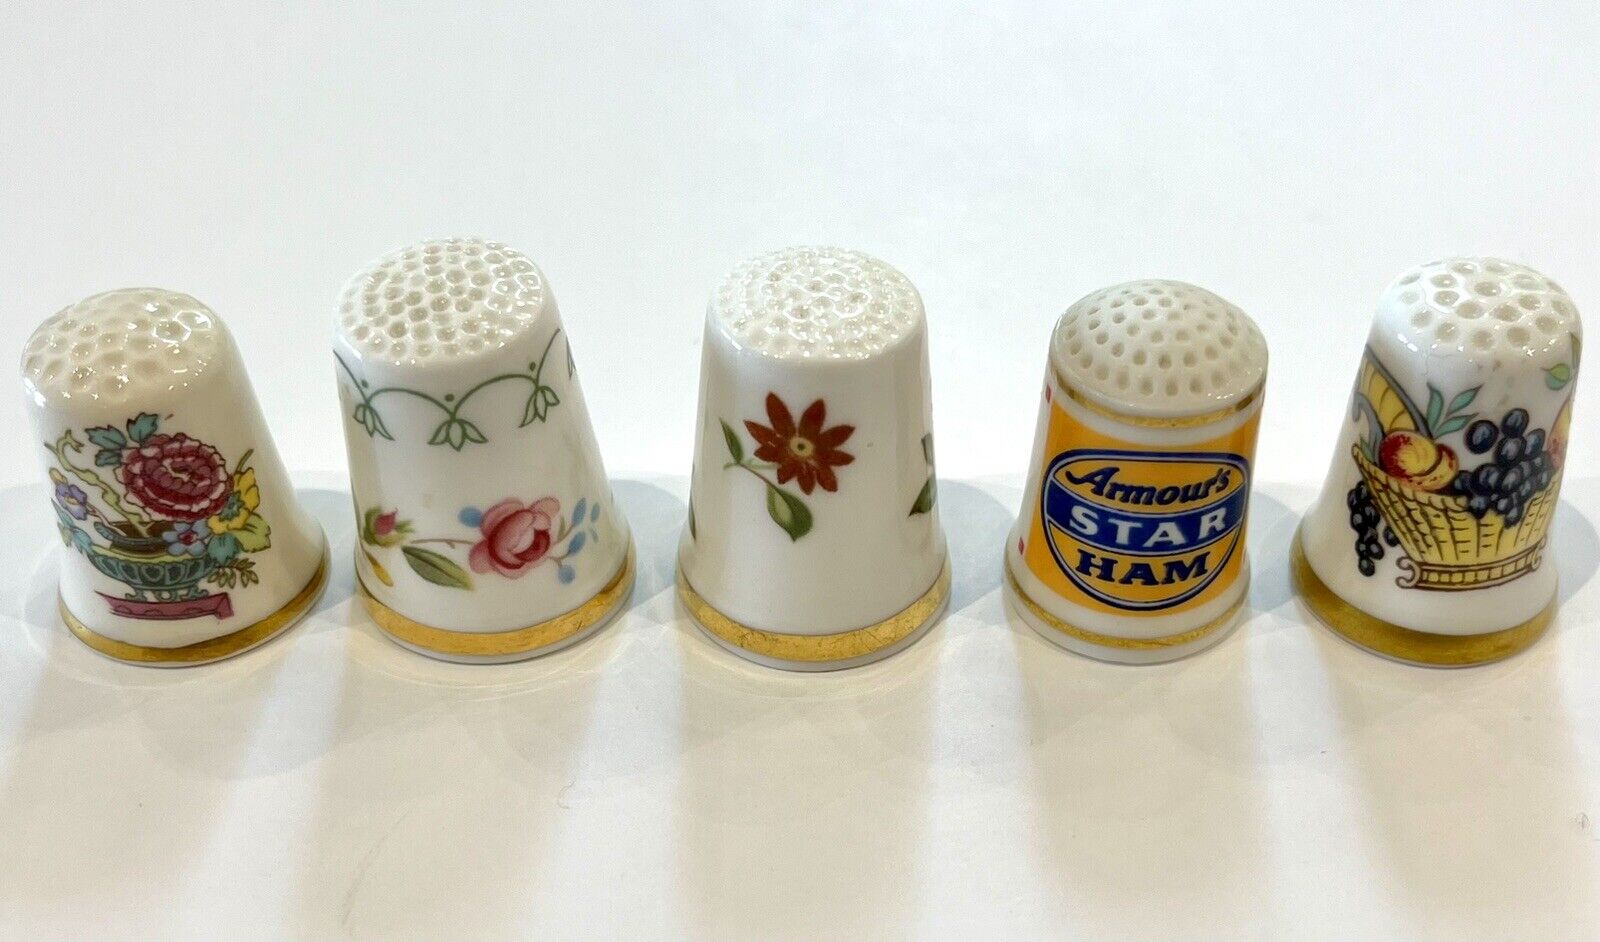 Vintage collectible assortment sewing thimbles lot of 6 - Some are rare